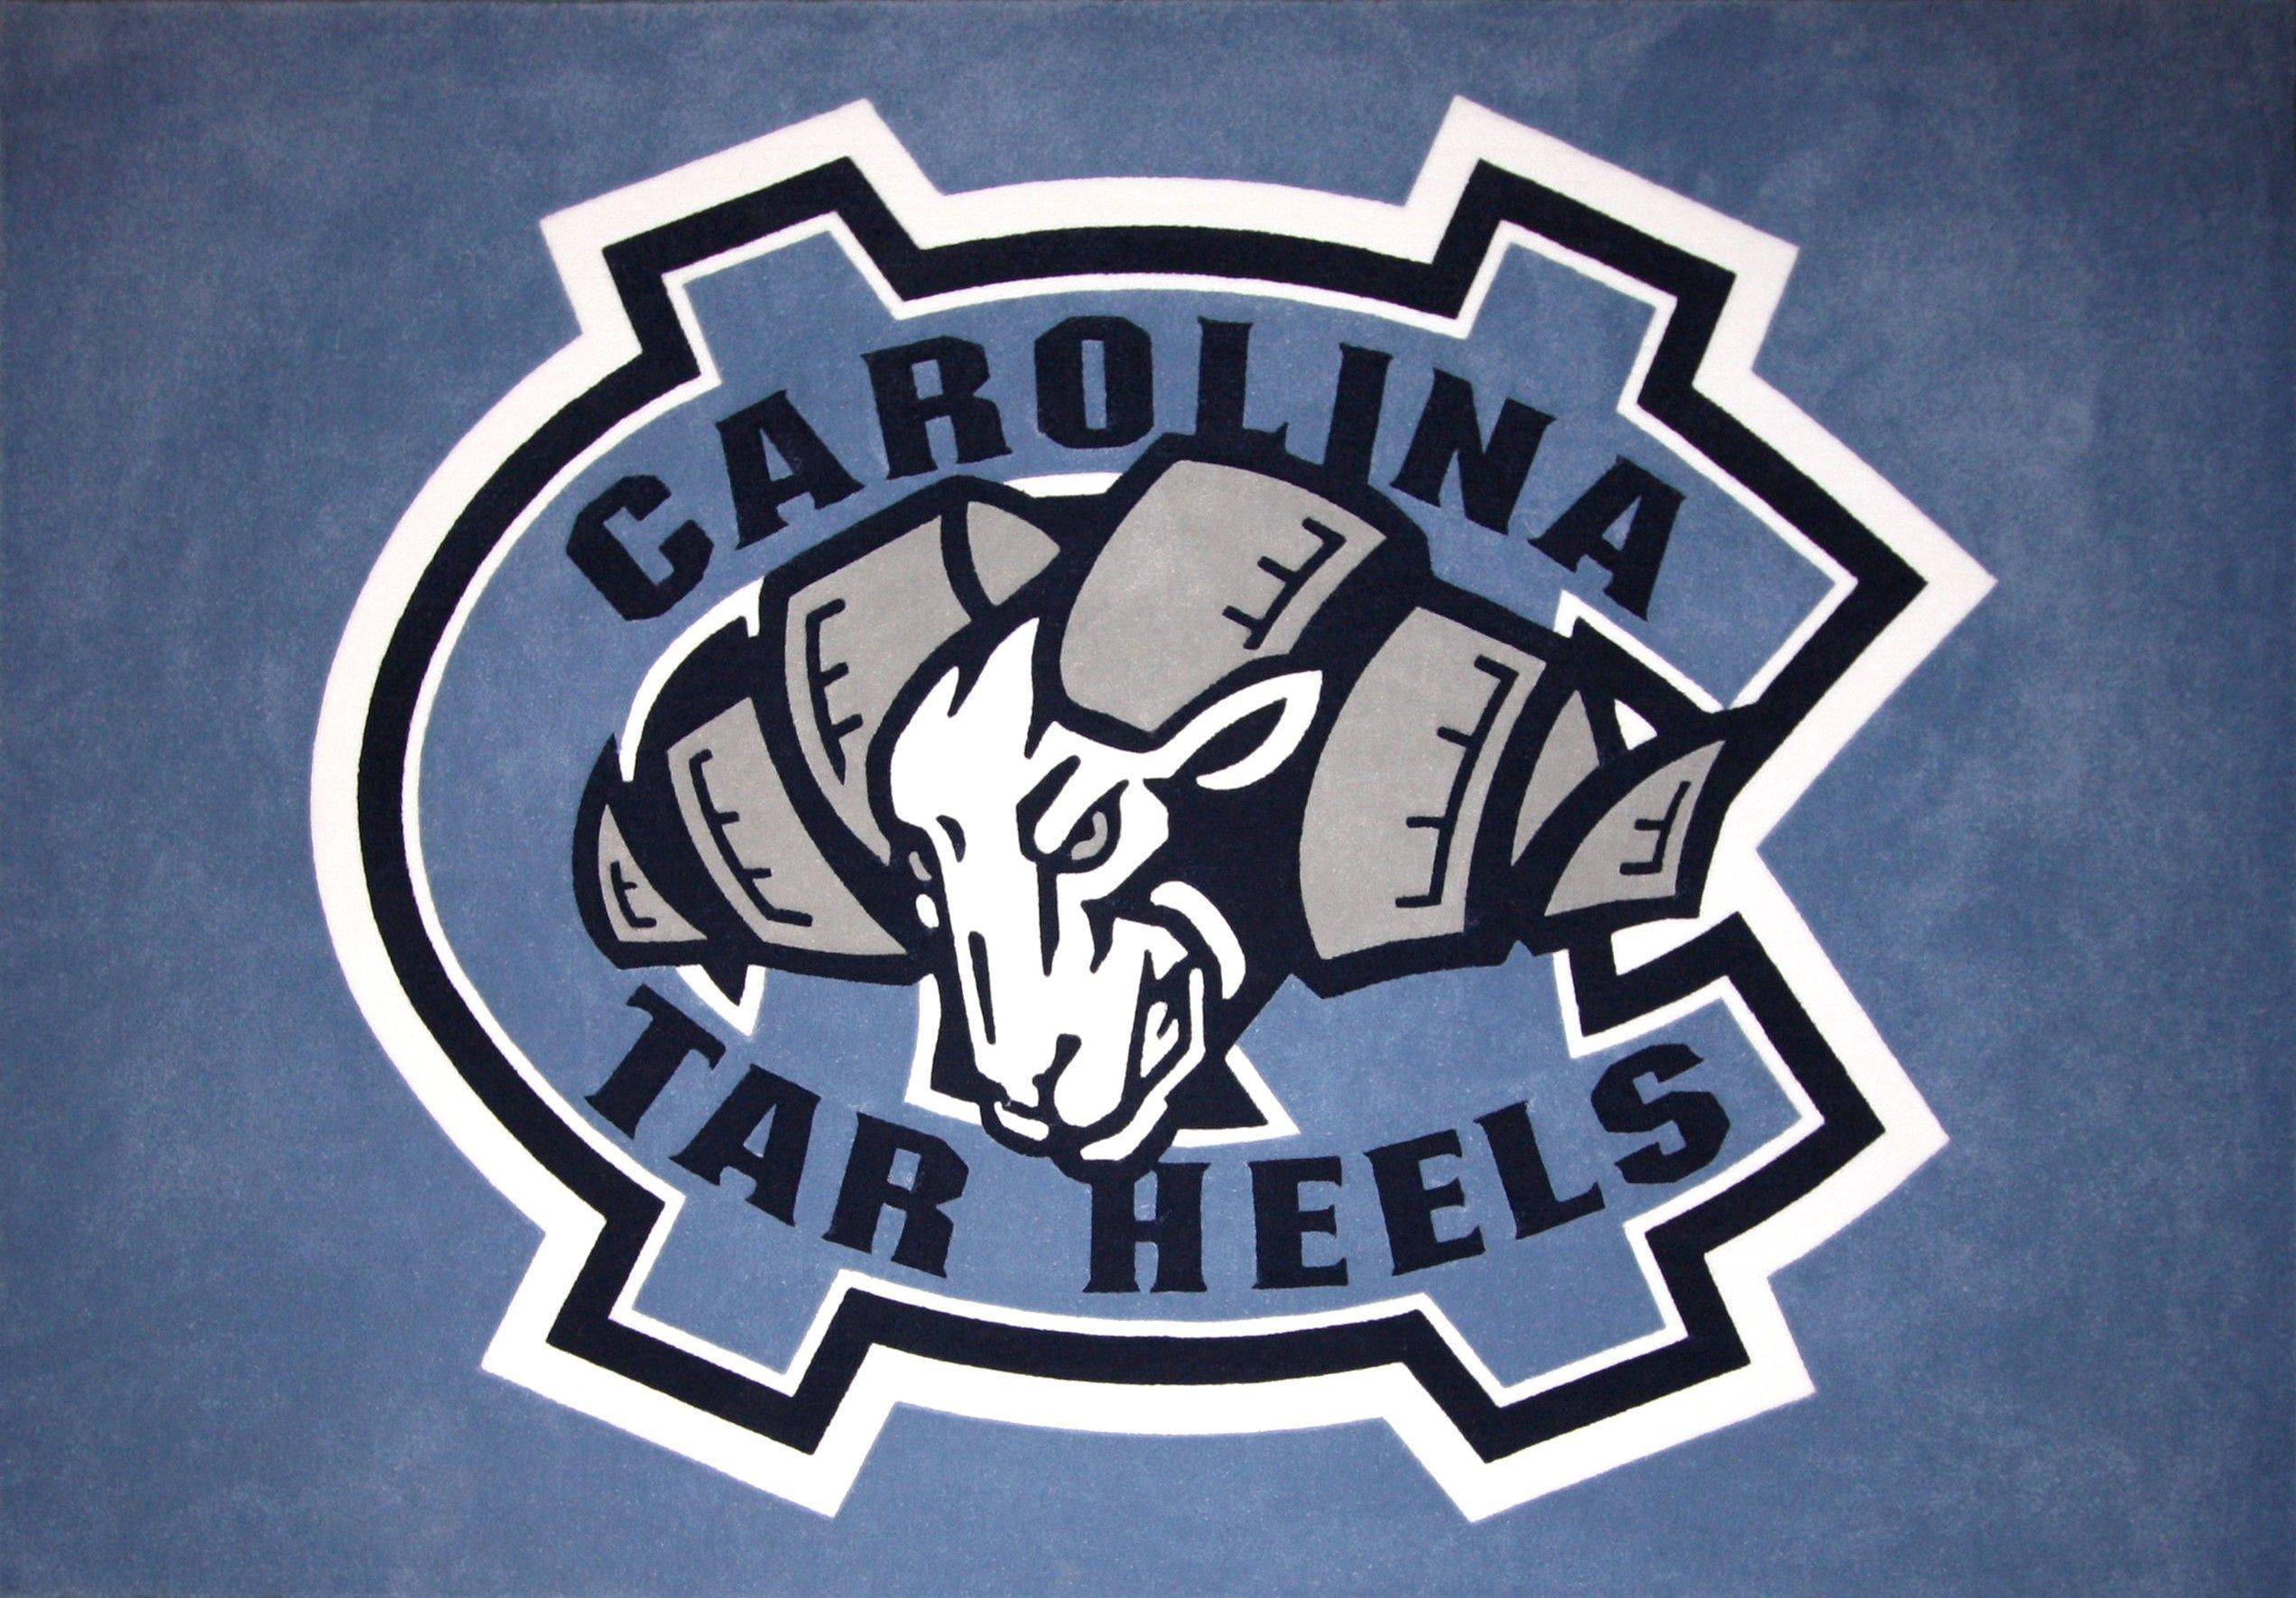 Unc Tar Heels Basketball Wallpaper Picture to